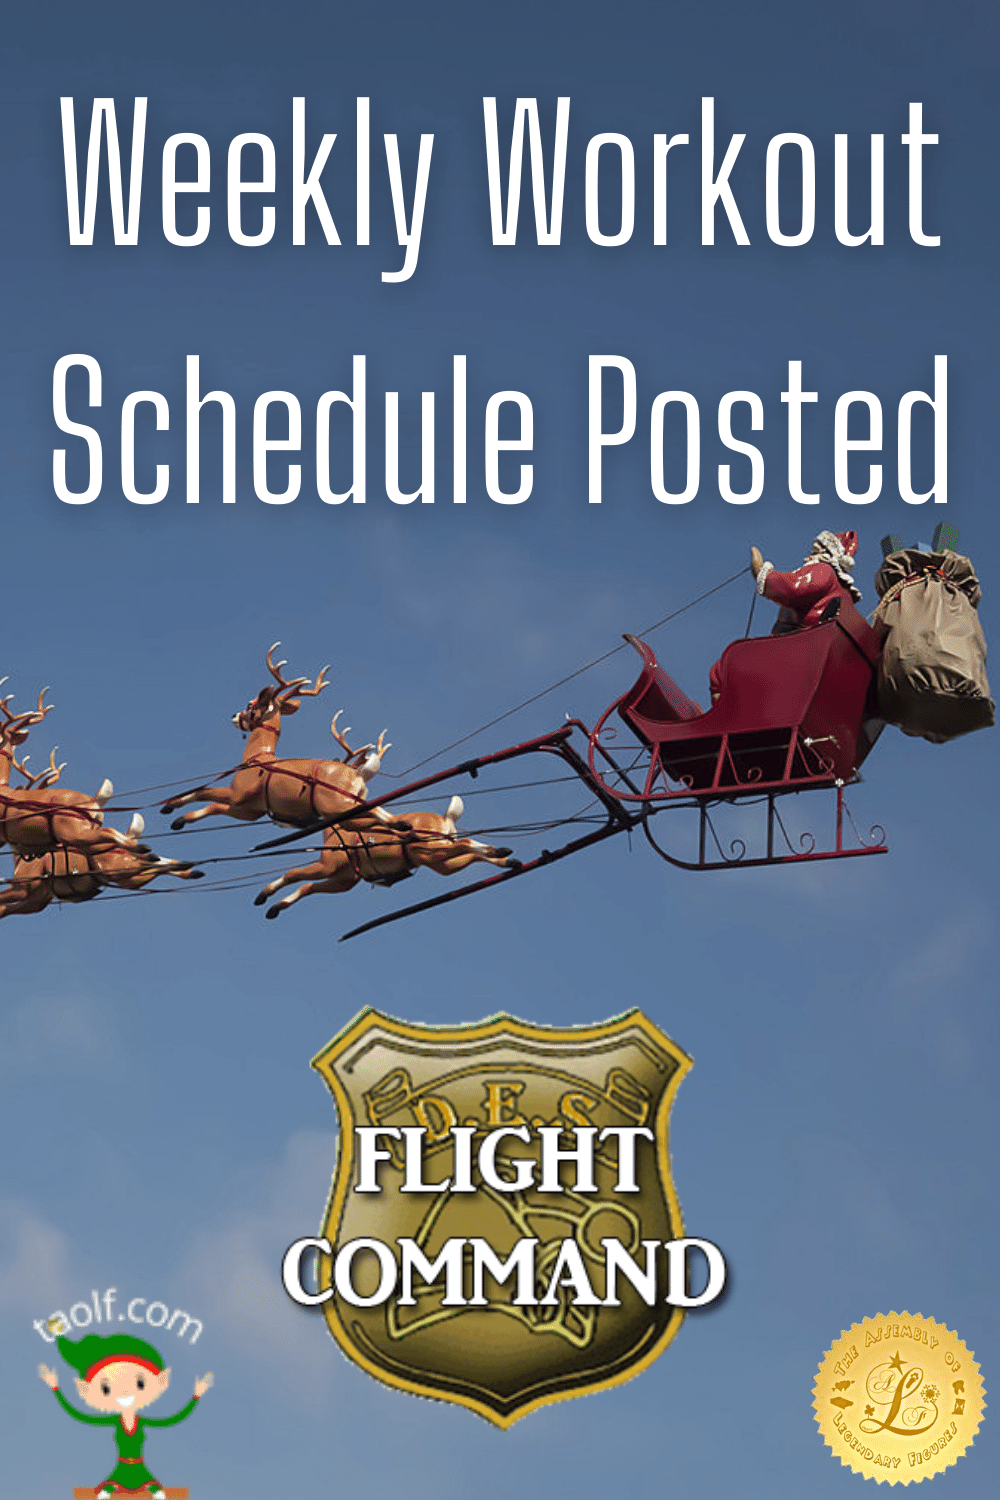 Flight Command Posts Weekly Flight Work Out Schedule